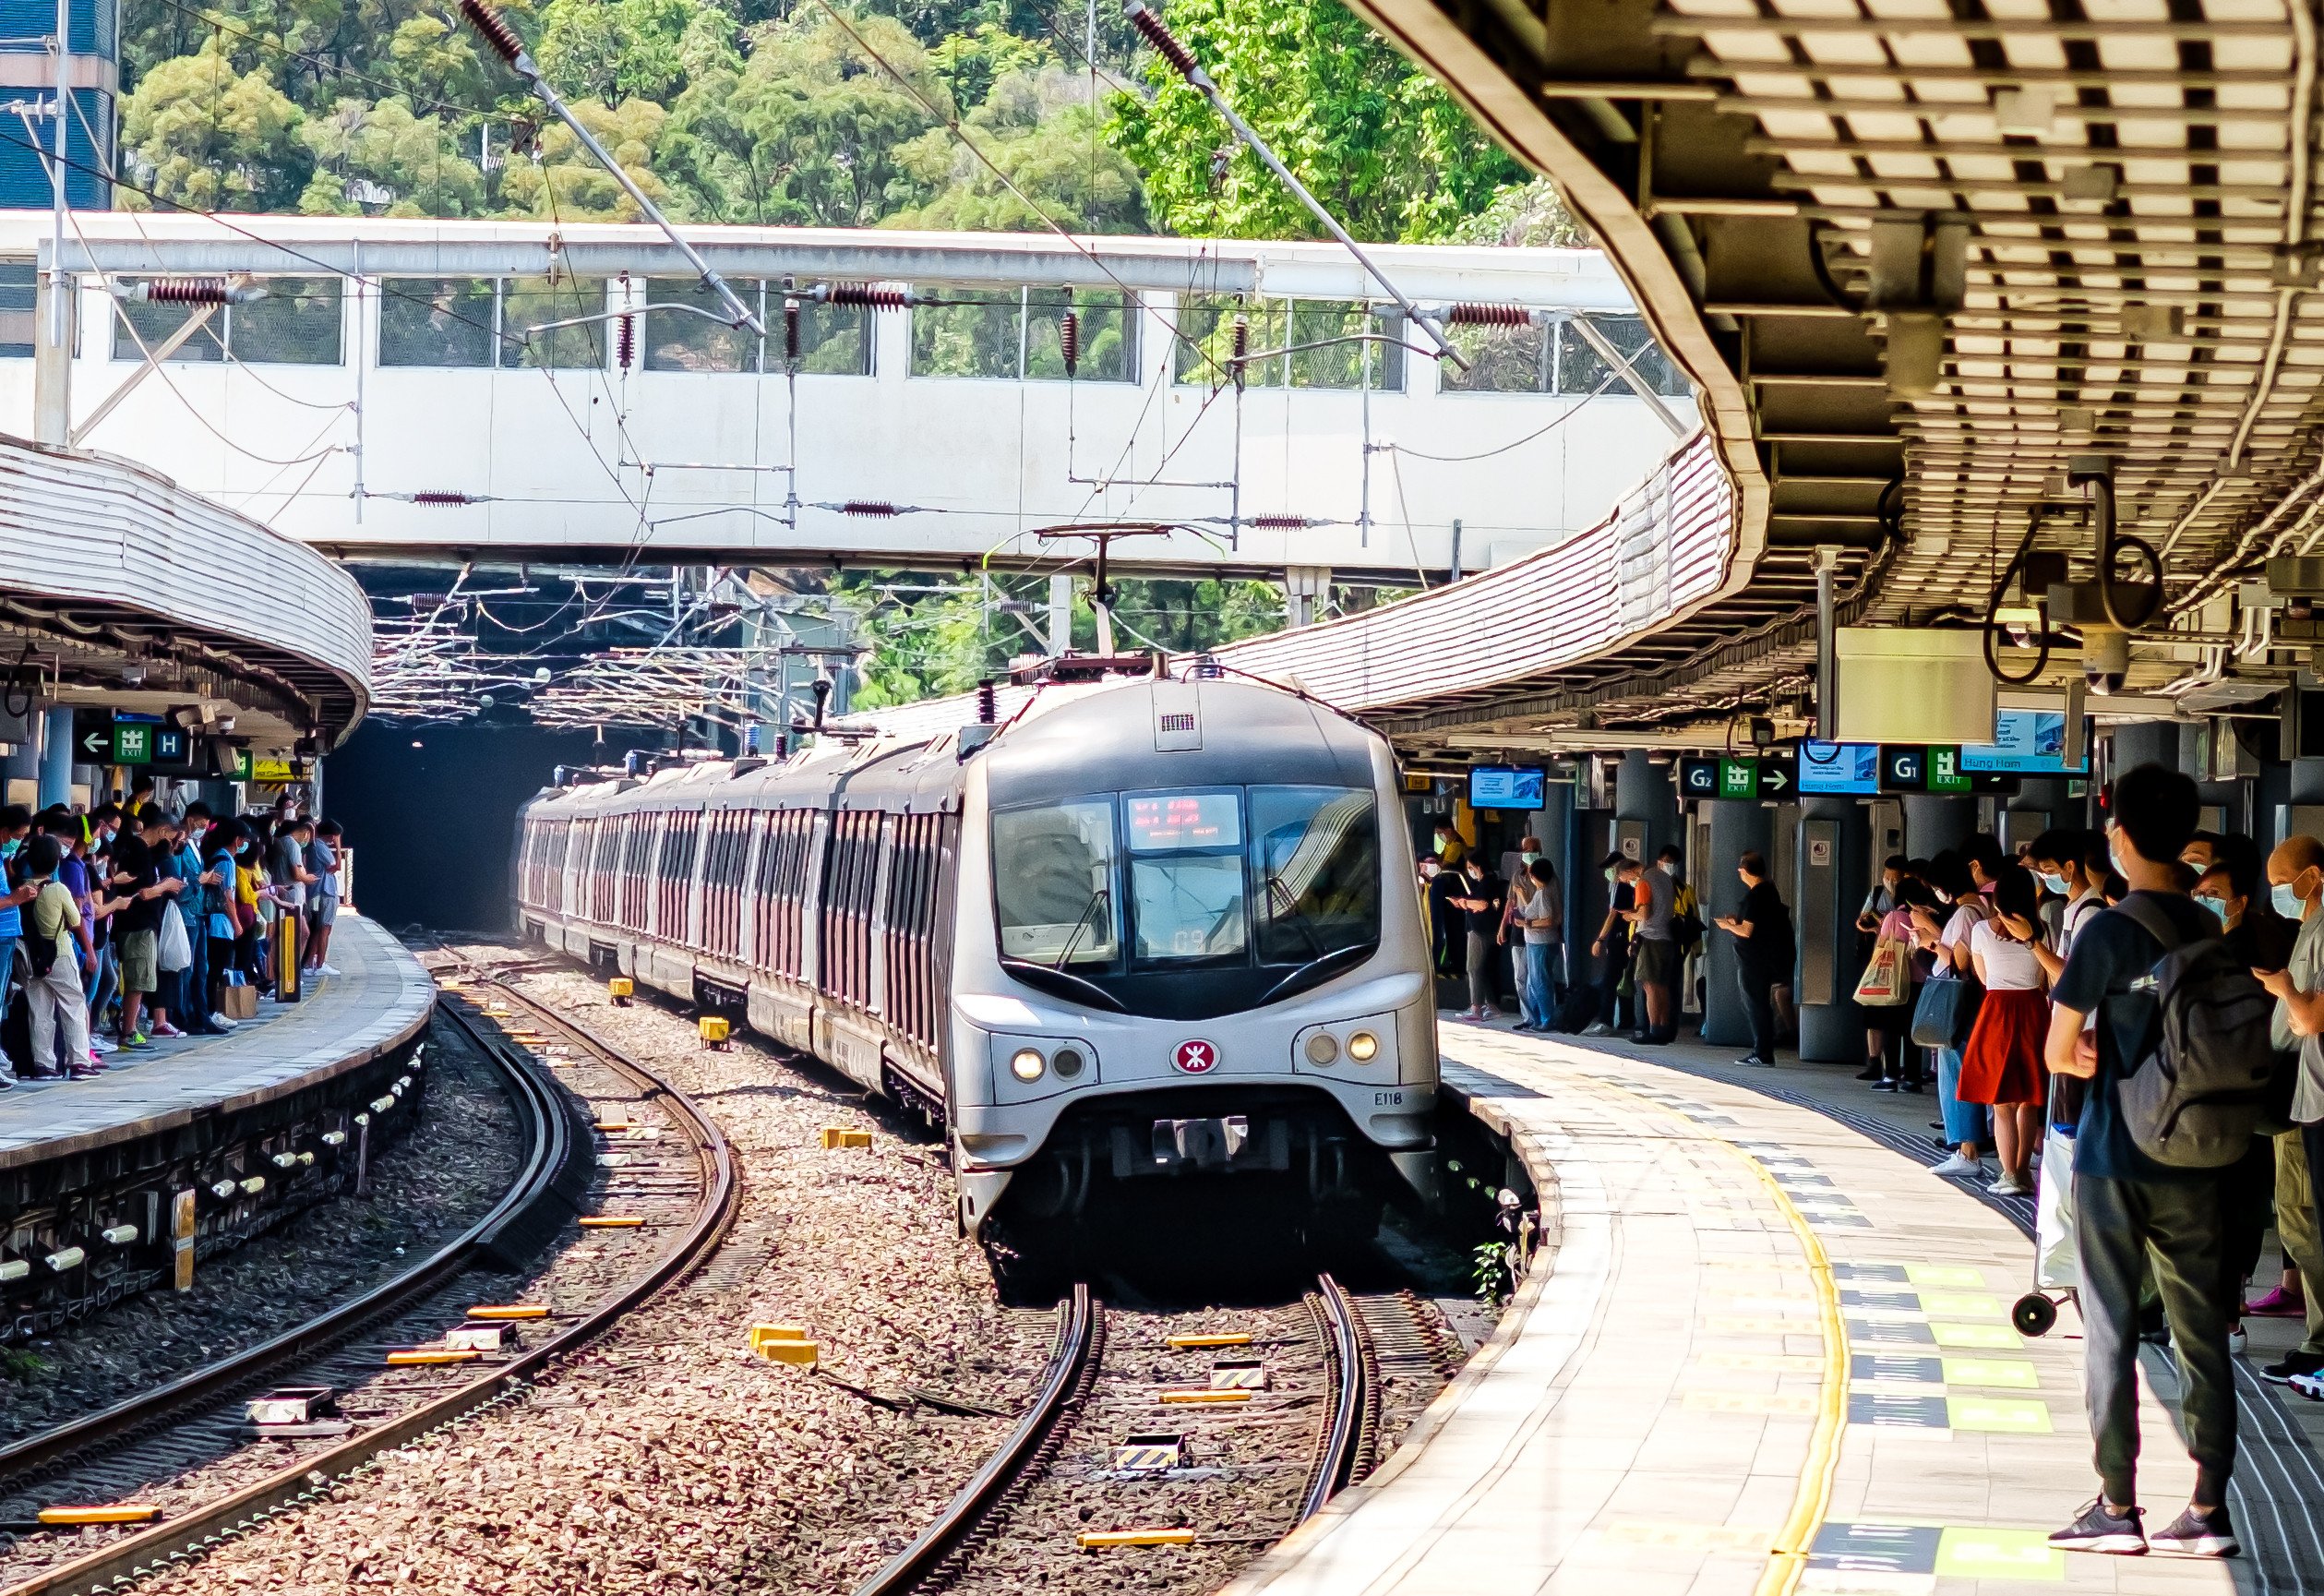 An MTR train on the East Rail line at Kowloon Tong station. The Fire Services Department deployed 13 fire trucks, one ambulance and a rapid response vehicle to the scene. Photo: Shutterstock